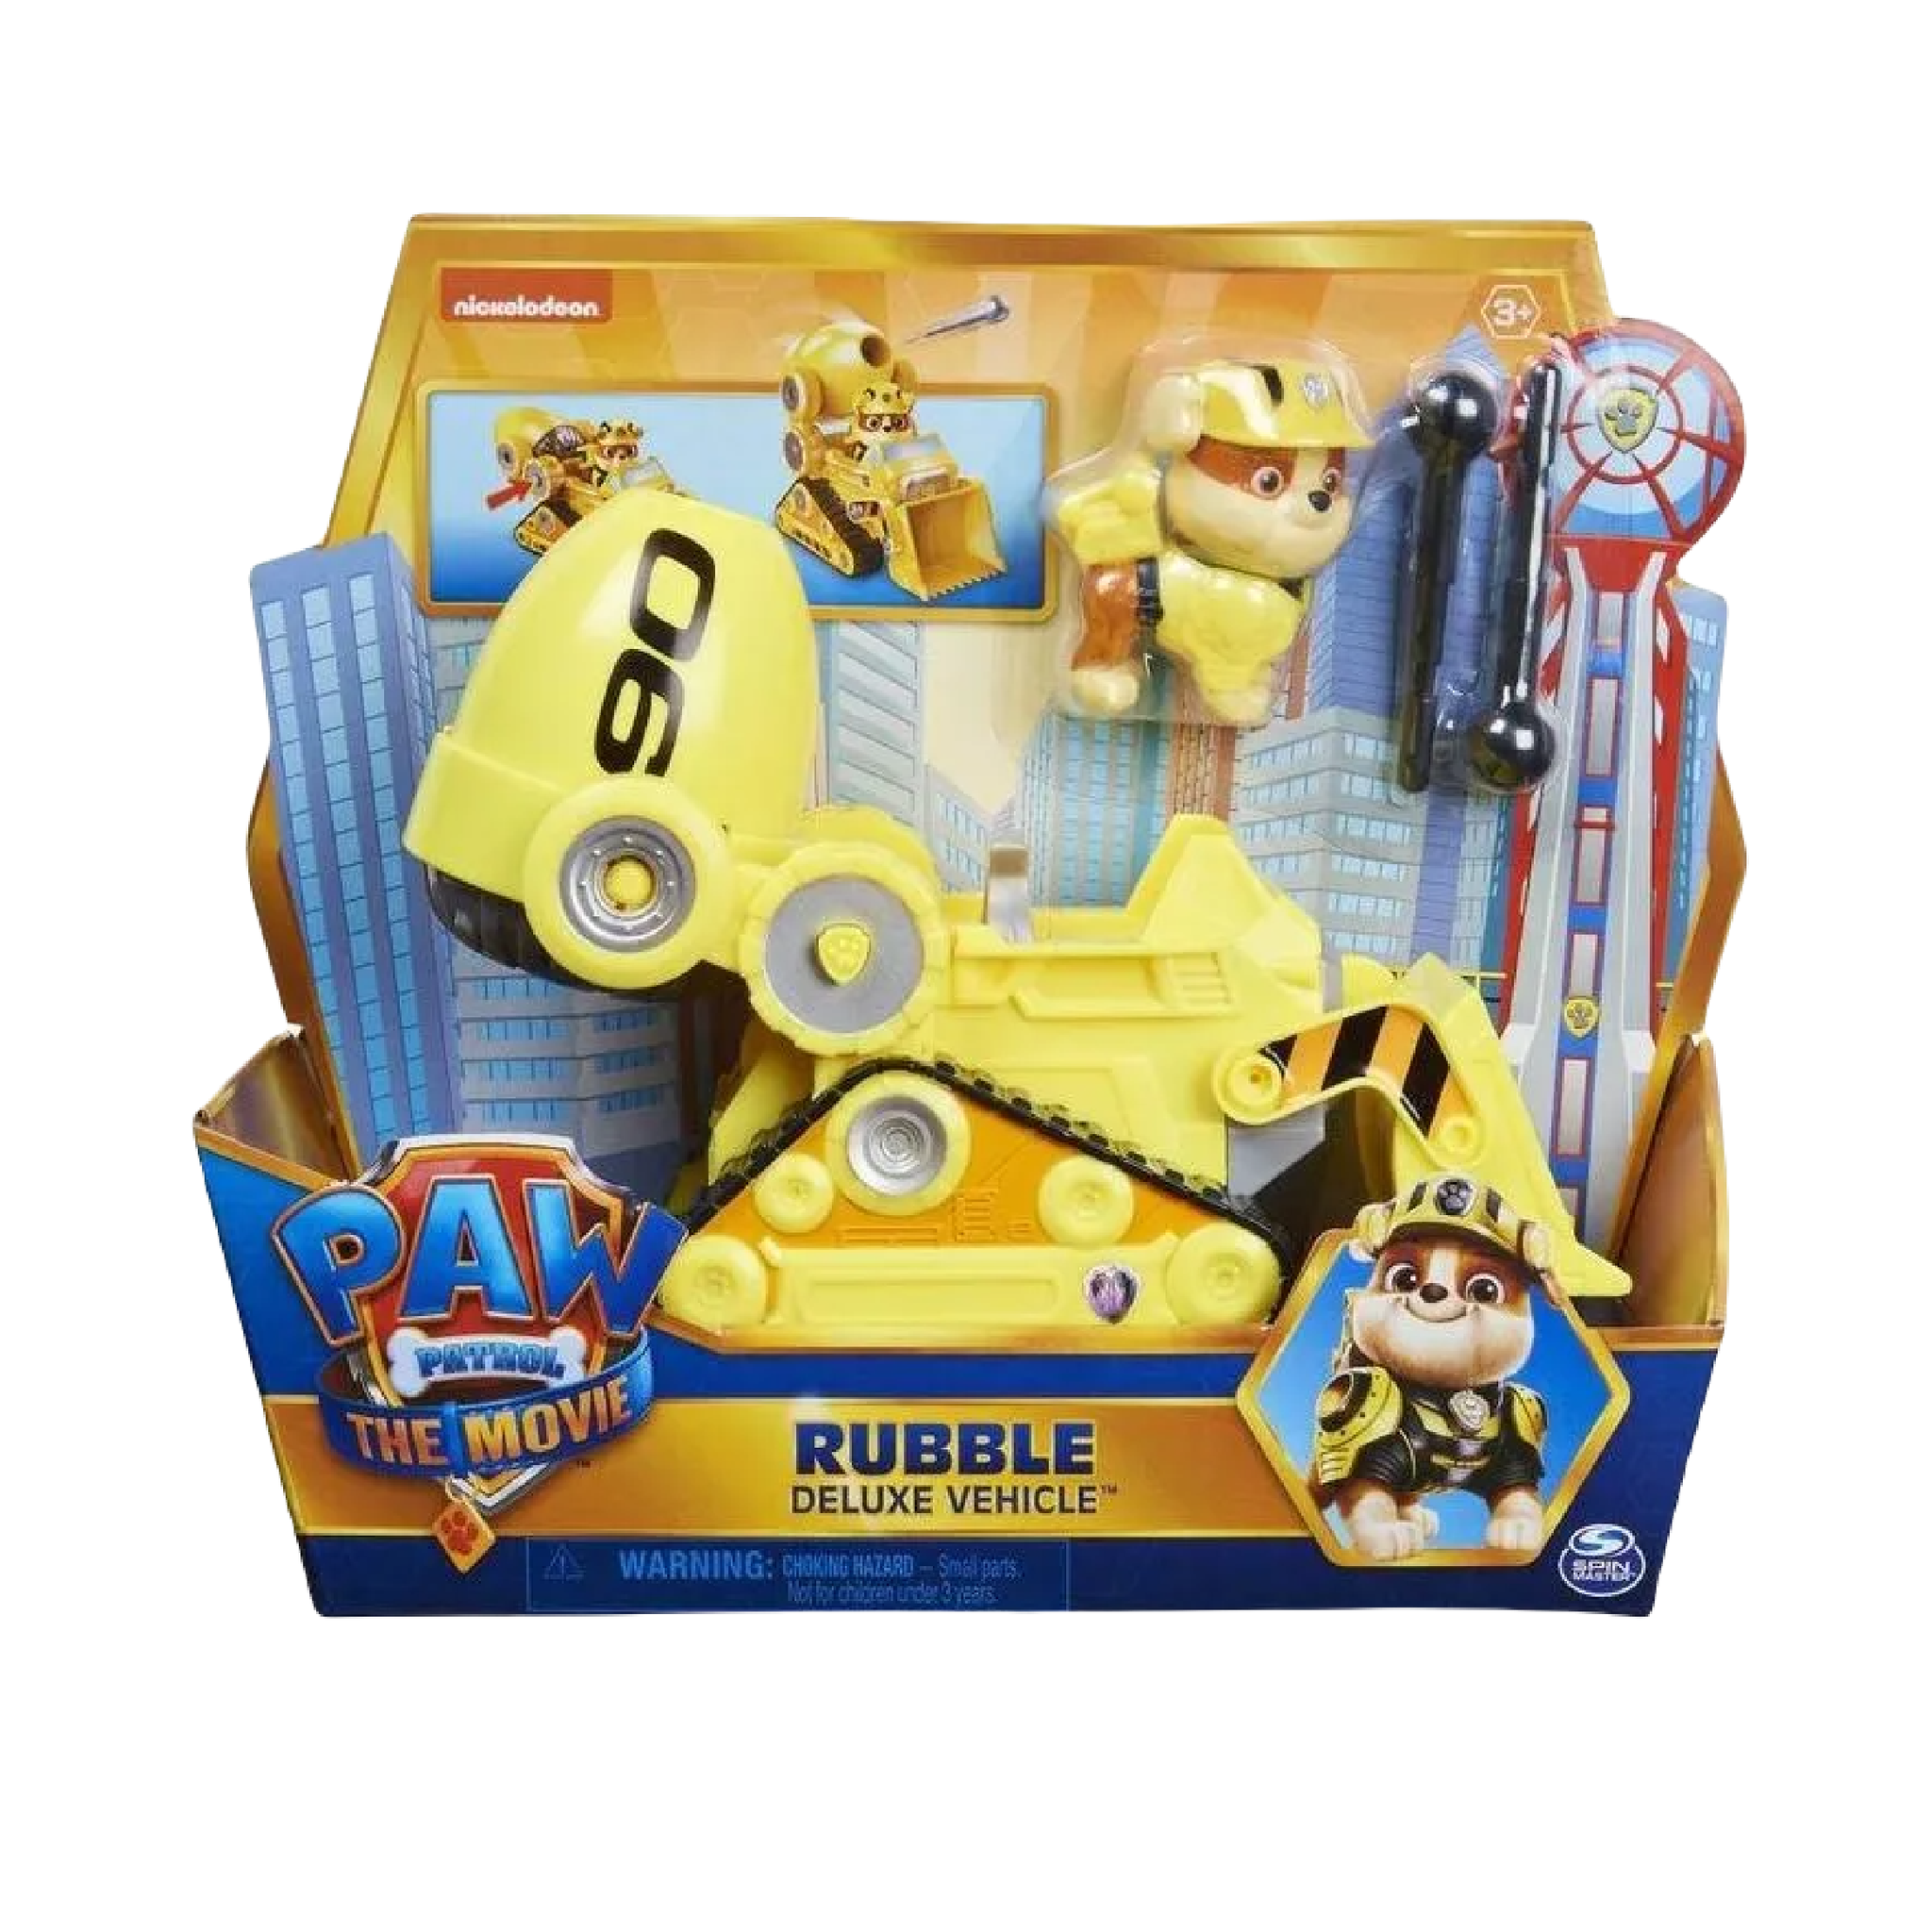 Paw Patrol - Rubble Deluxe Vehicle